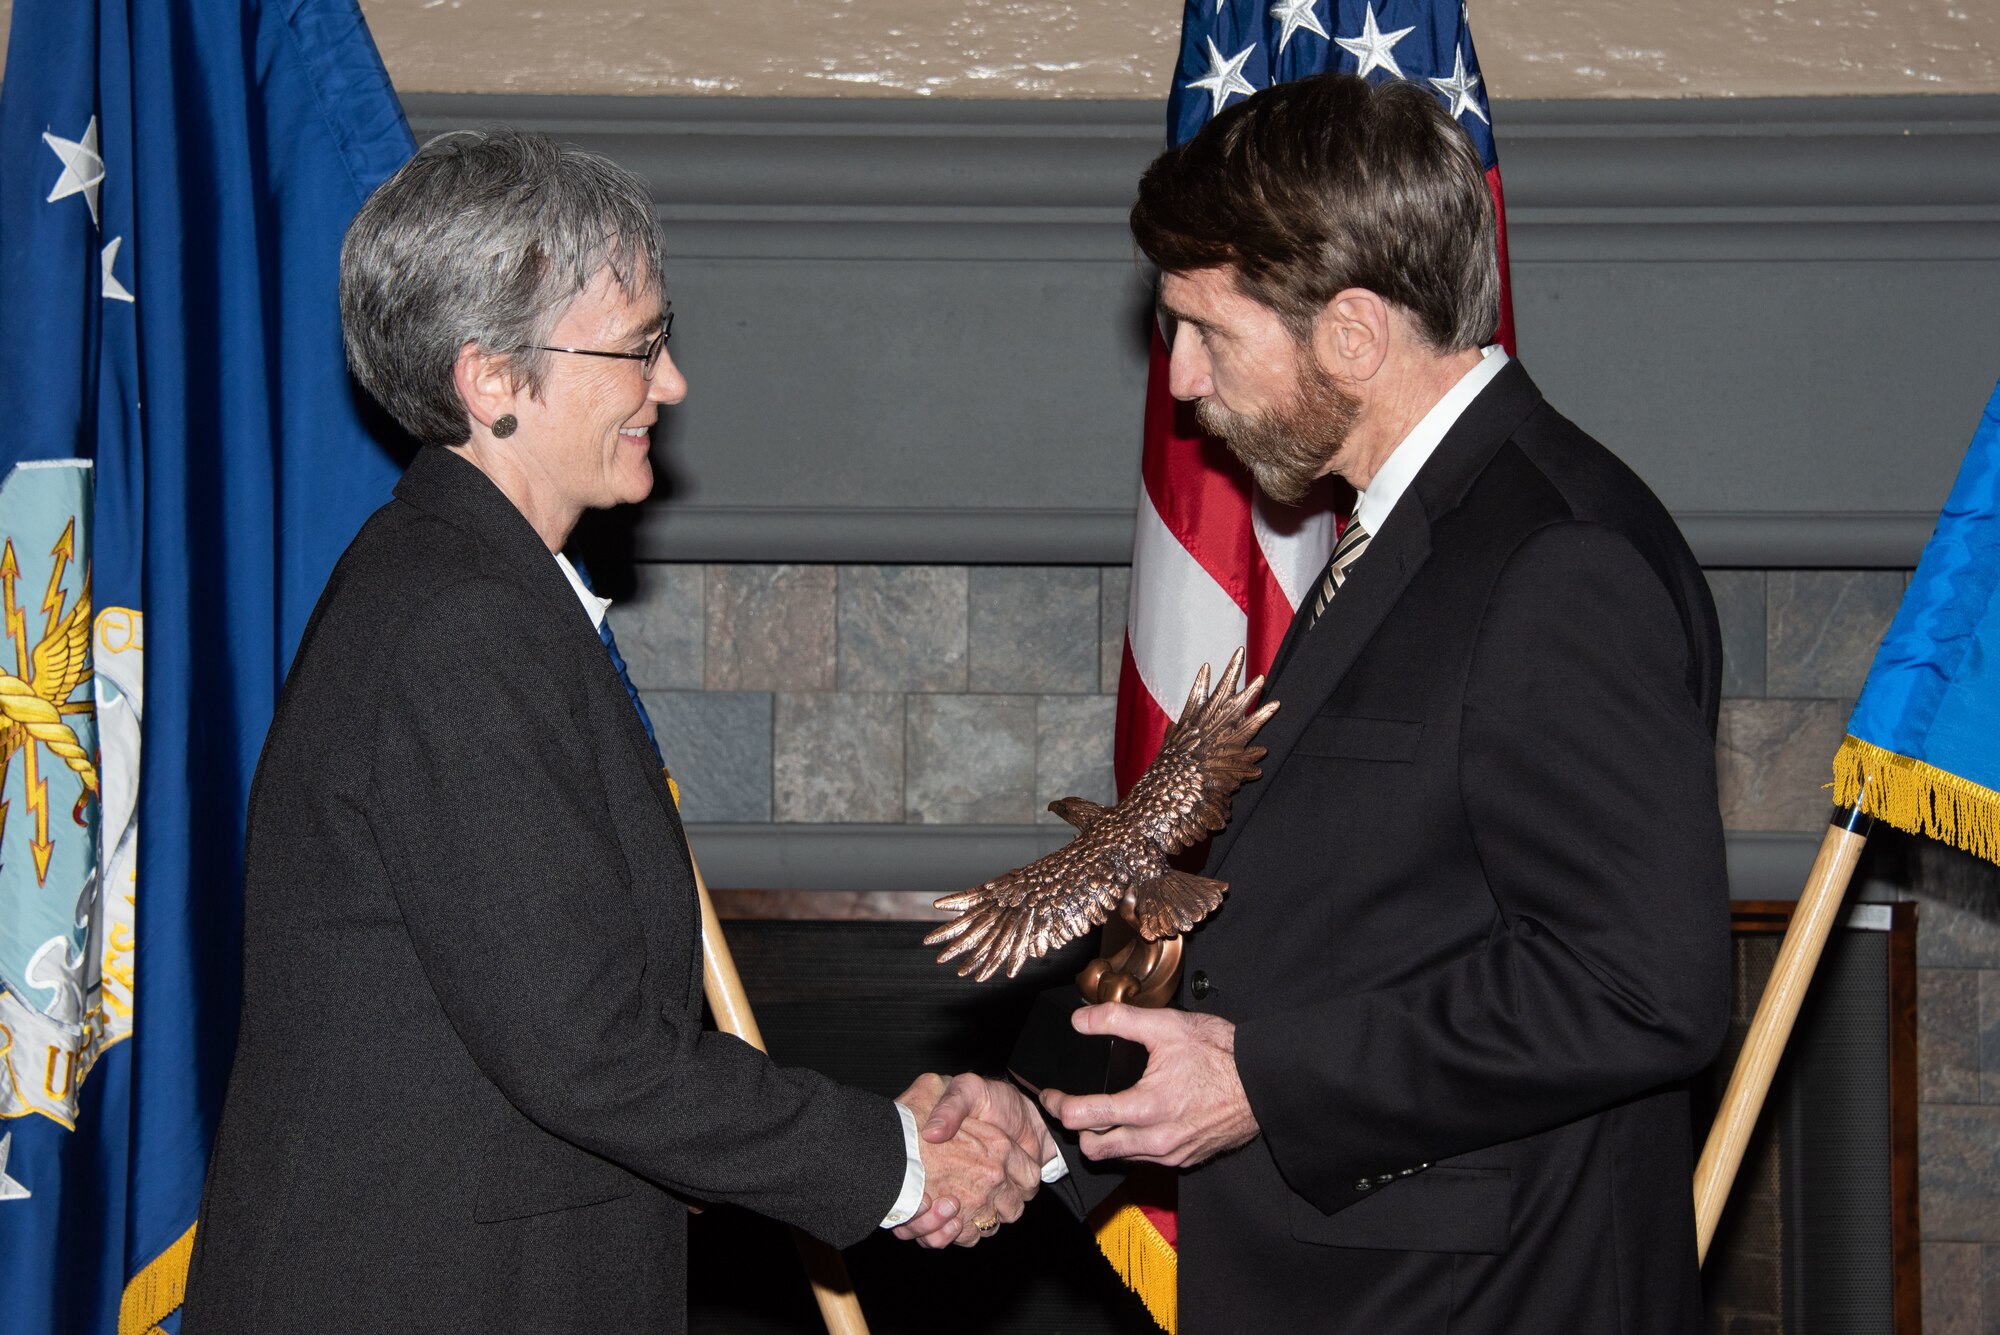 Secretary of the Air Force Heather Wilson, left, presents Dr. Jeffrey Reilly, Air Command and Staff College Future Security Studies director, right, with the 2019 Secretary of the Air Force Leadership Award May 14, 2019, at Maxwell Air Force Base, Alabama. Dr. Reilly worked with Indo-Pacific Command, Africa Command, United States Army Training and Doctrine Command, Defense Threat Reduction Agency, the U.S. Department of State and German, Polish and Danish military colleges to develop the Multi-Domain Operational Strategists concentration, embracing the new 130 Multi-Domain career field and the 11F Fellowship immersion program.